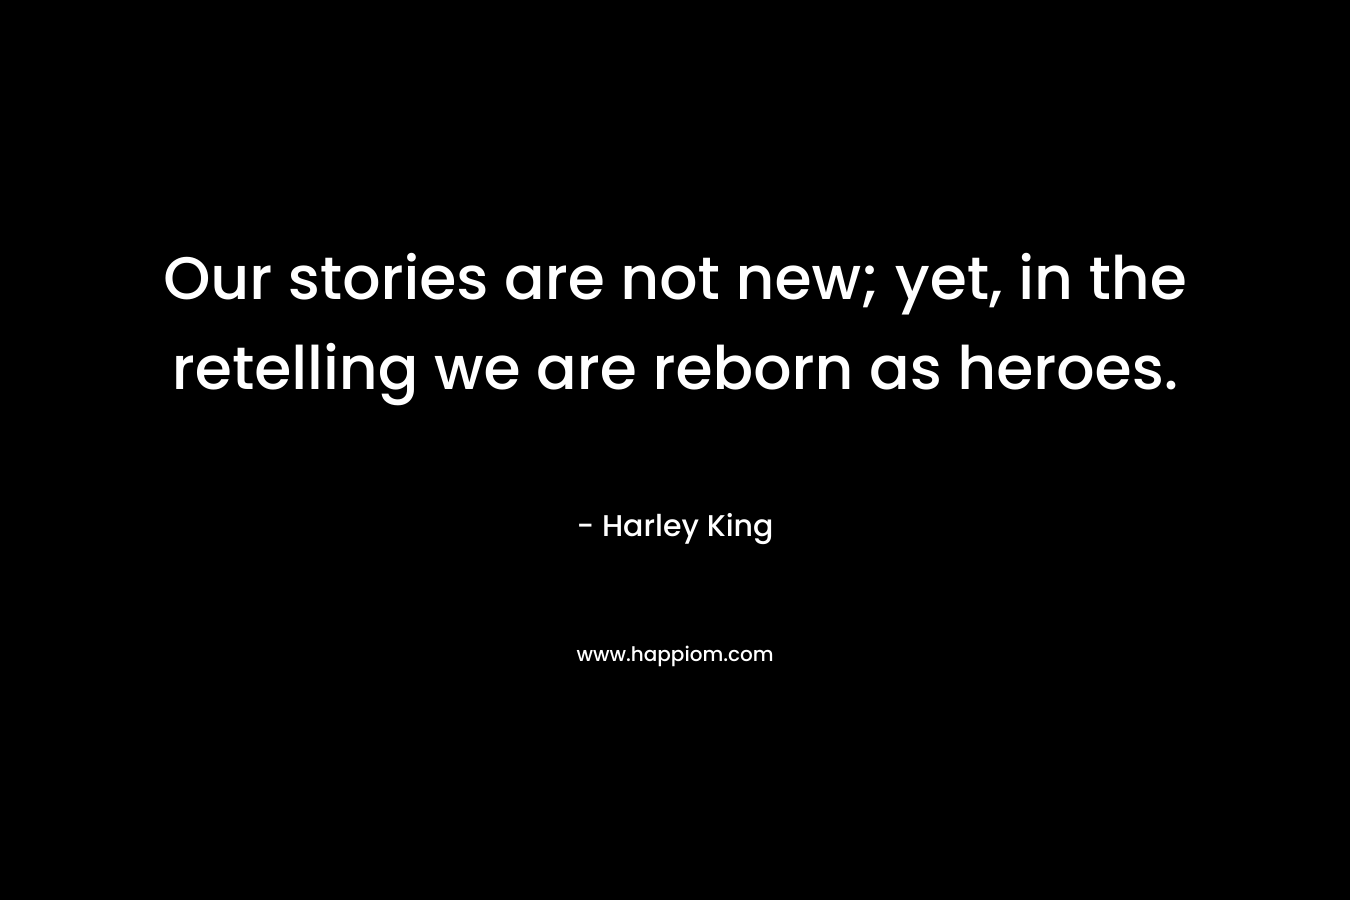 Our stories are not new; yet, in the retelling we are reborn as heroes.